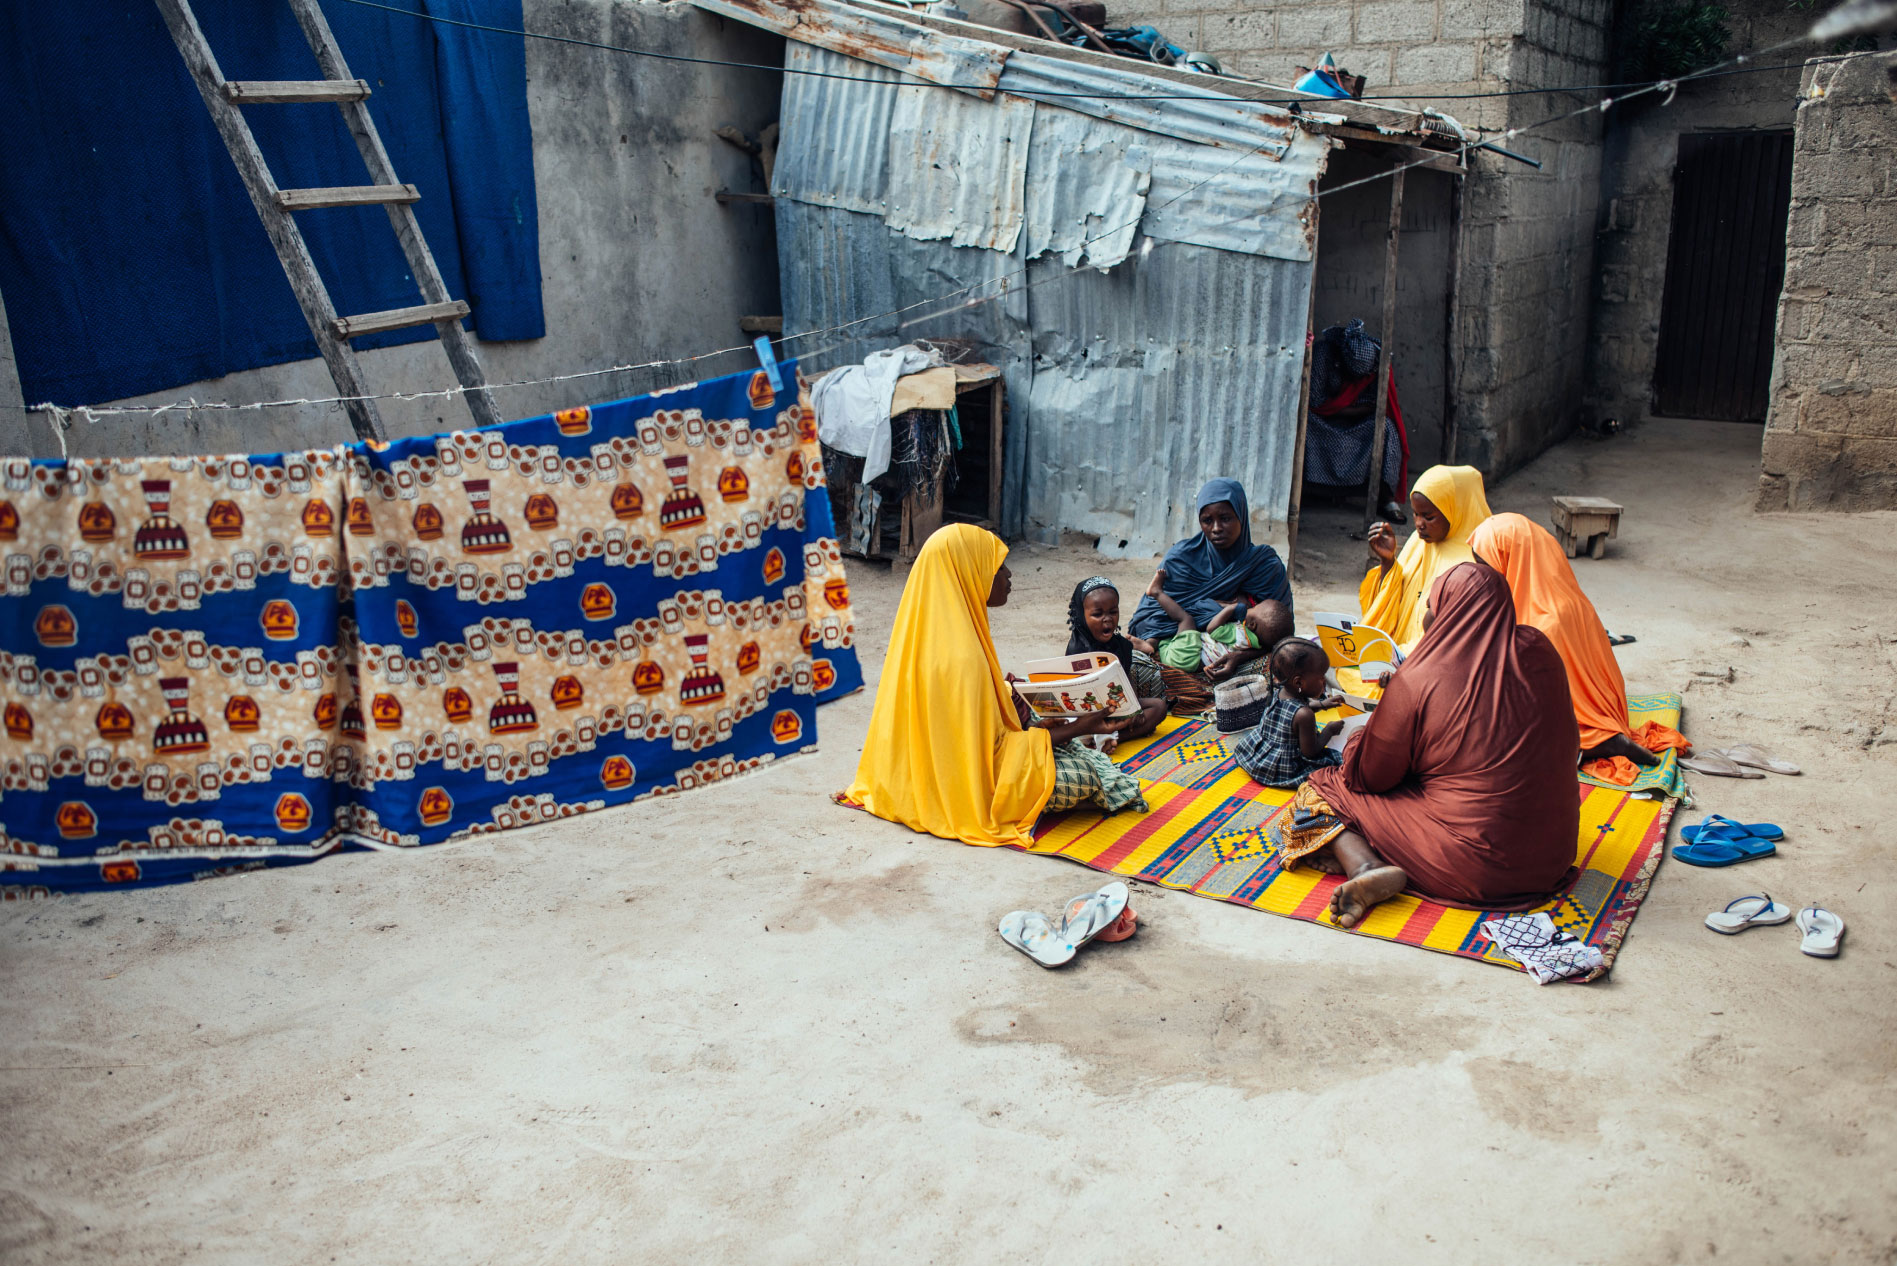 Lead mother and entrepreneur Hauwa Mustapha, 30, interacts with other women during mother-to-mother support  session within their community at Sulubri, Maiduguri, Borno, Nigeria.